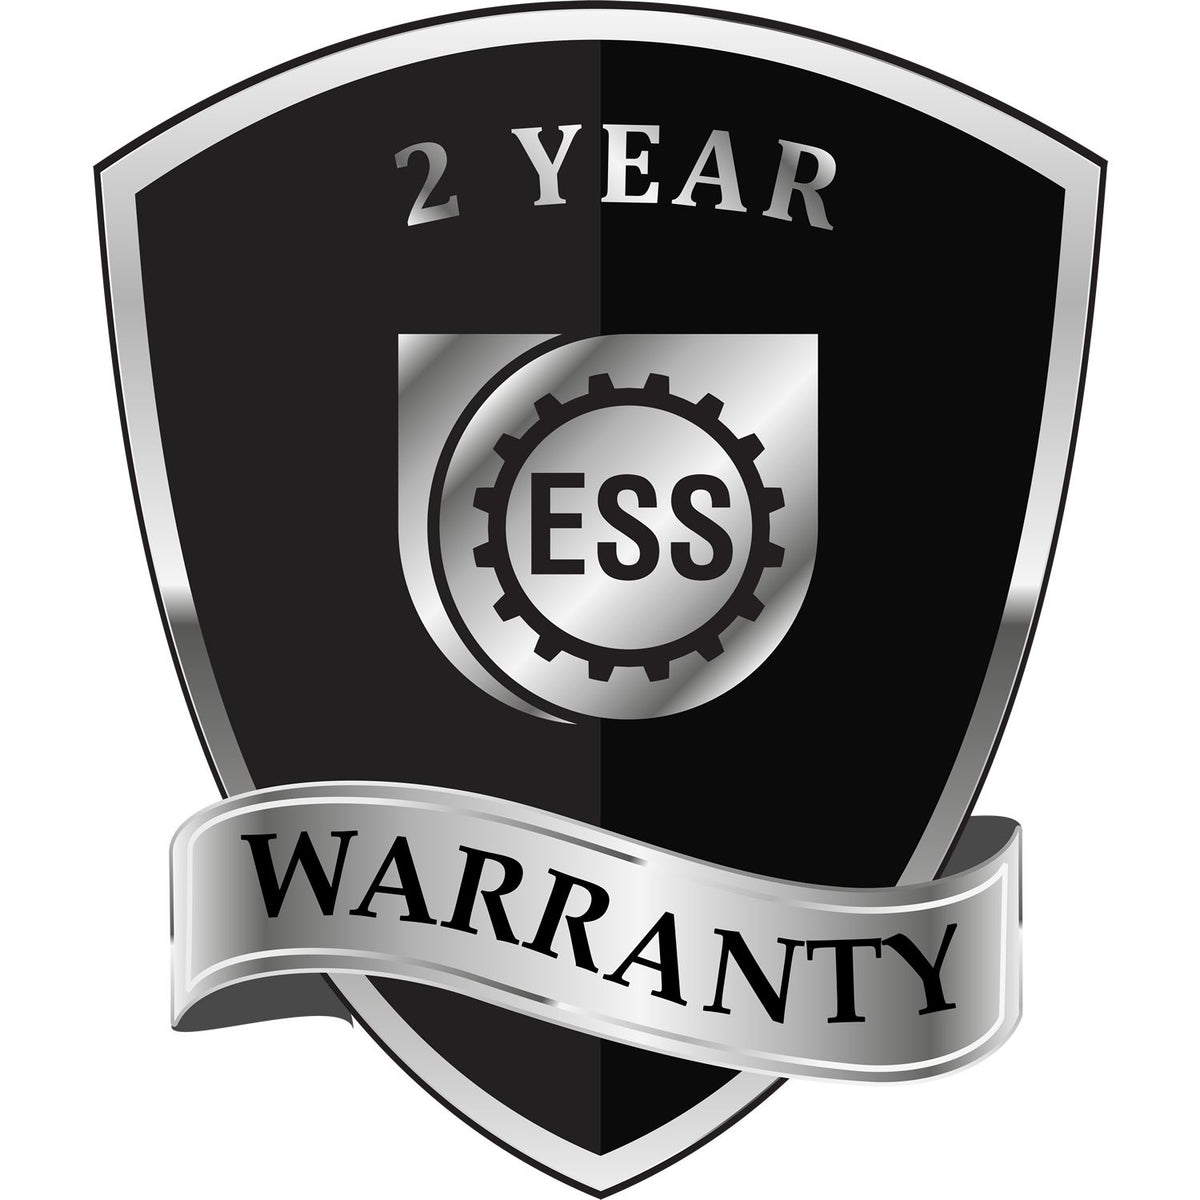 A badge or emblem showing a warranty icon for the State of Nevada Extended Long Reach Engineer Seal